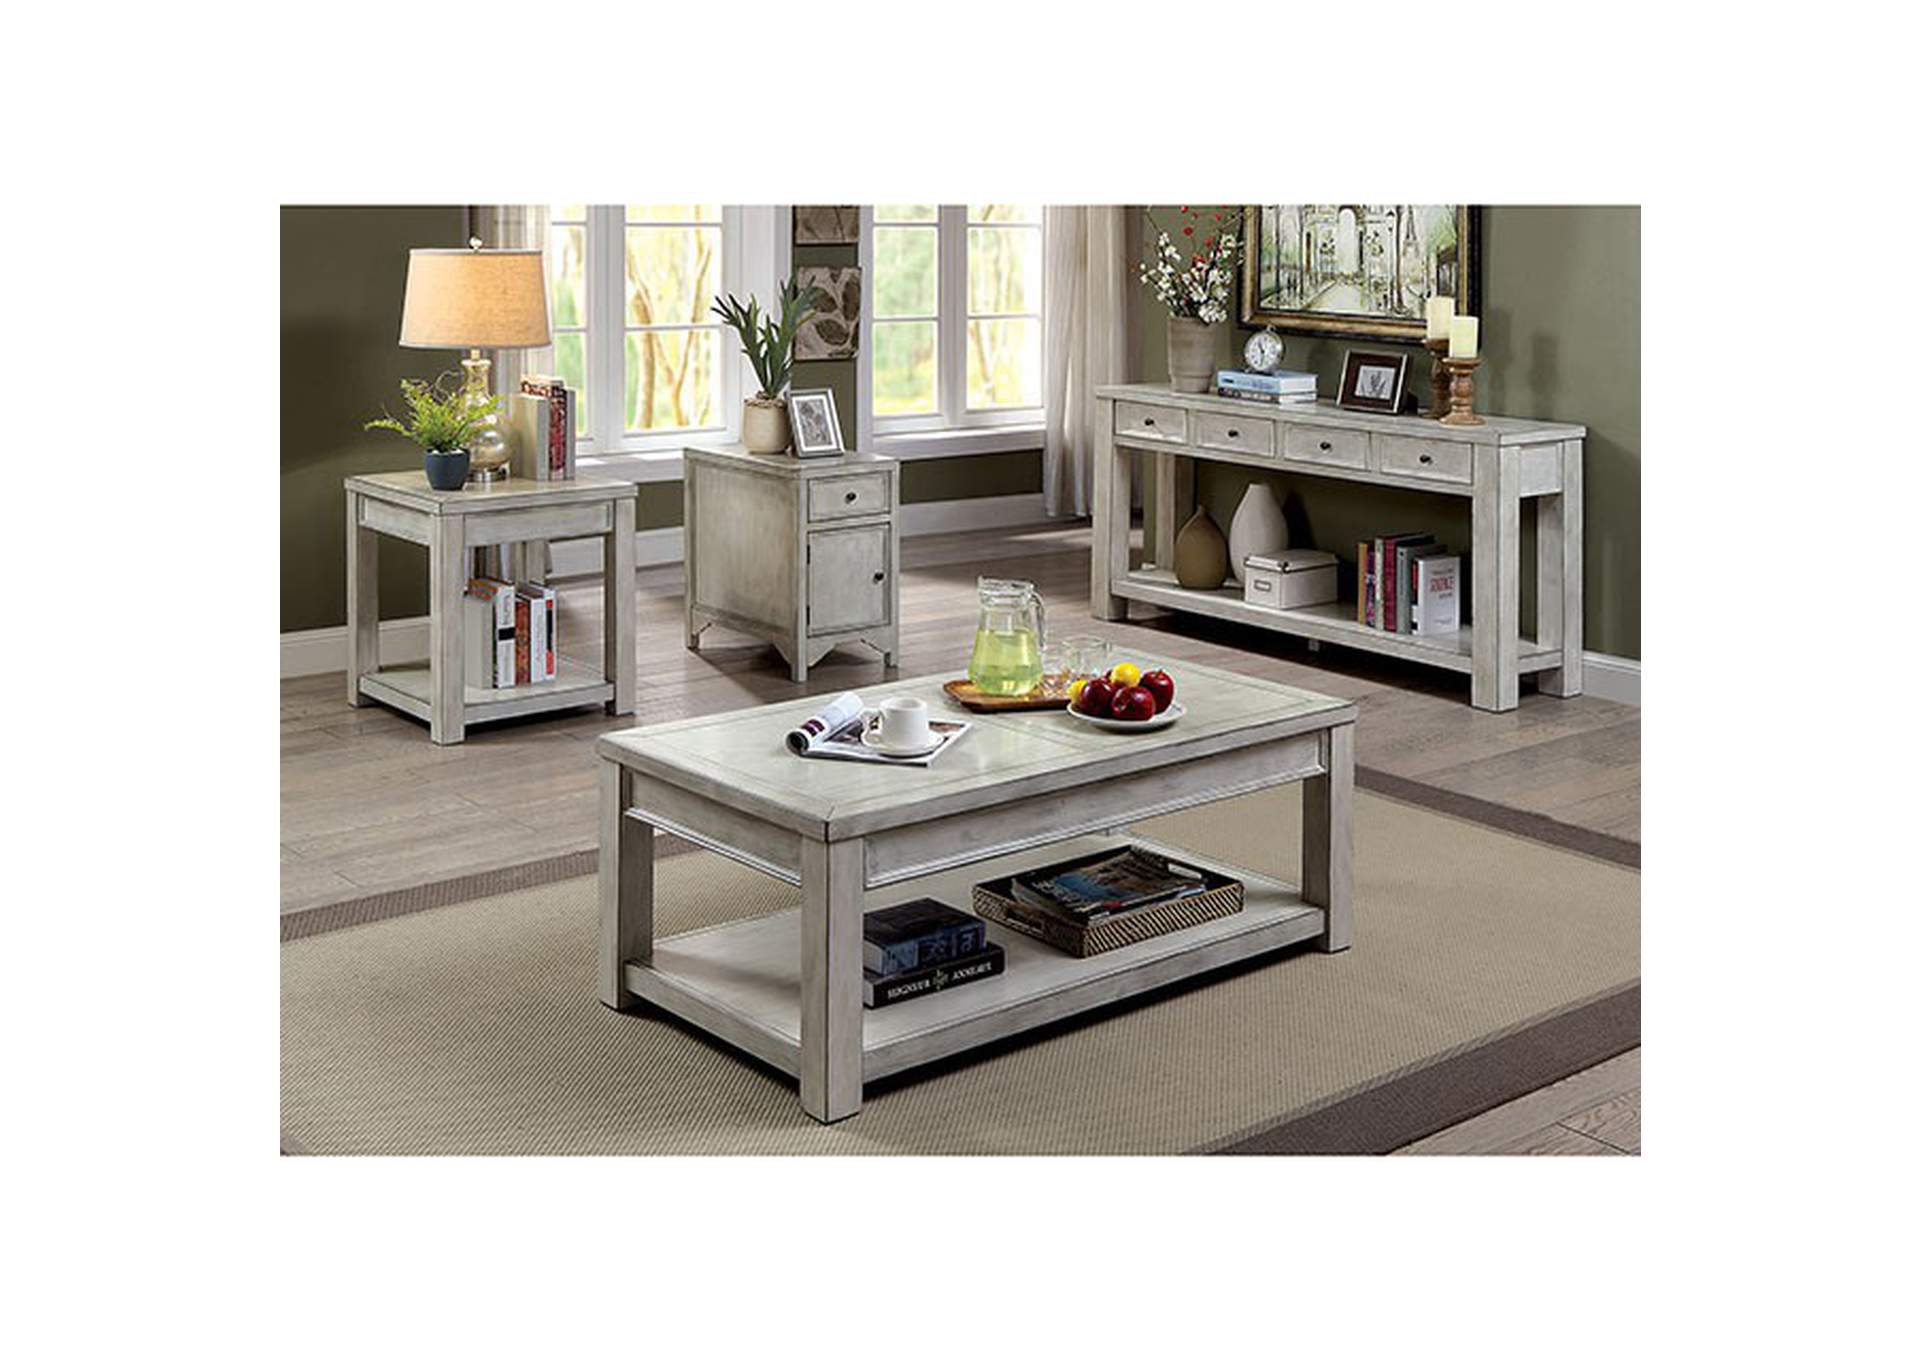 Meadow End Table,Furniture of America